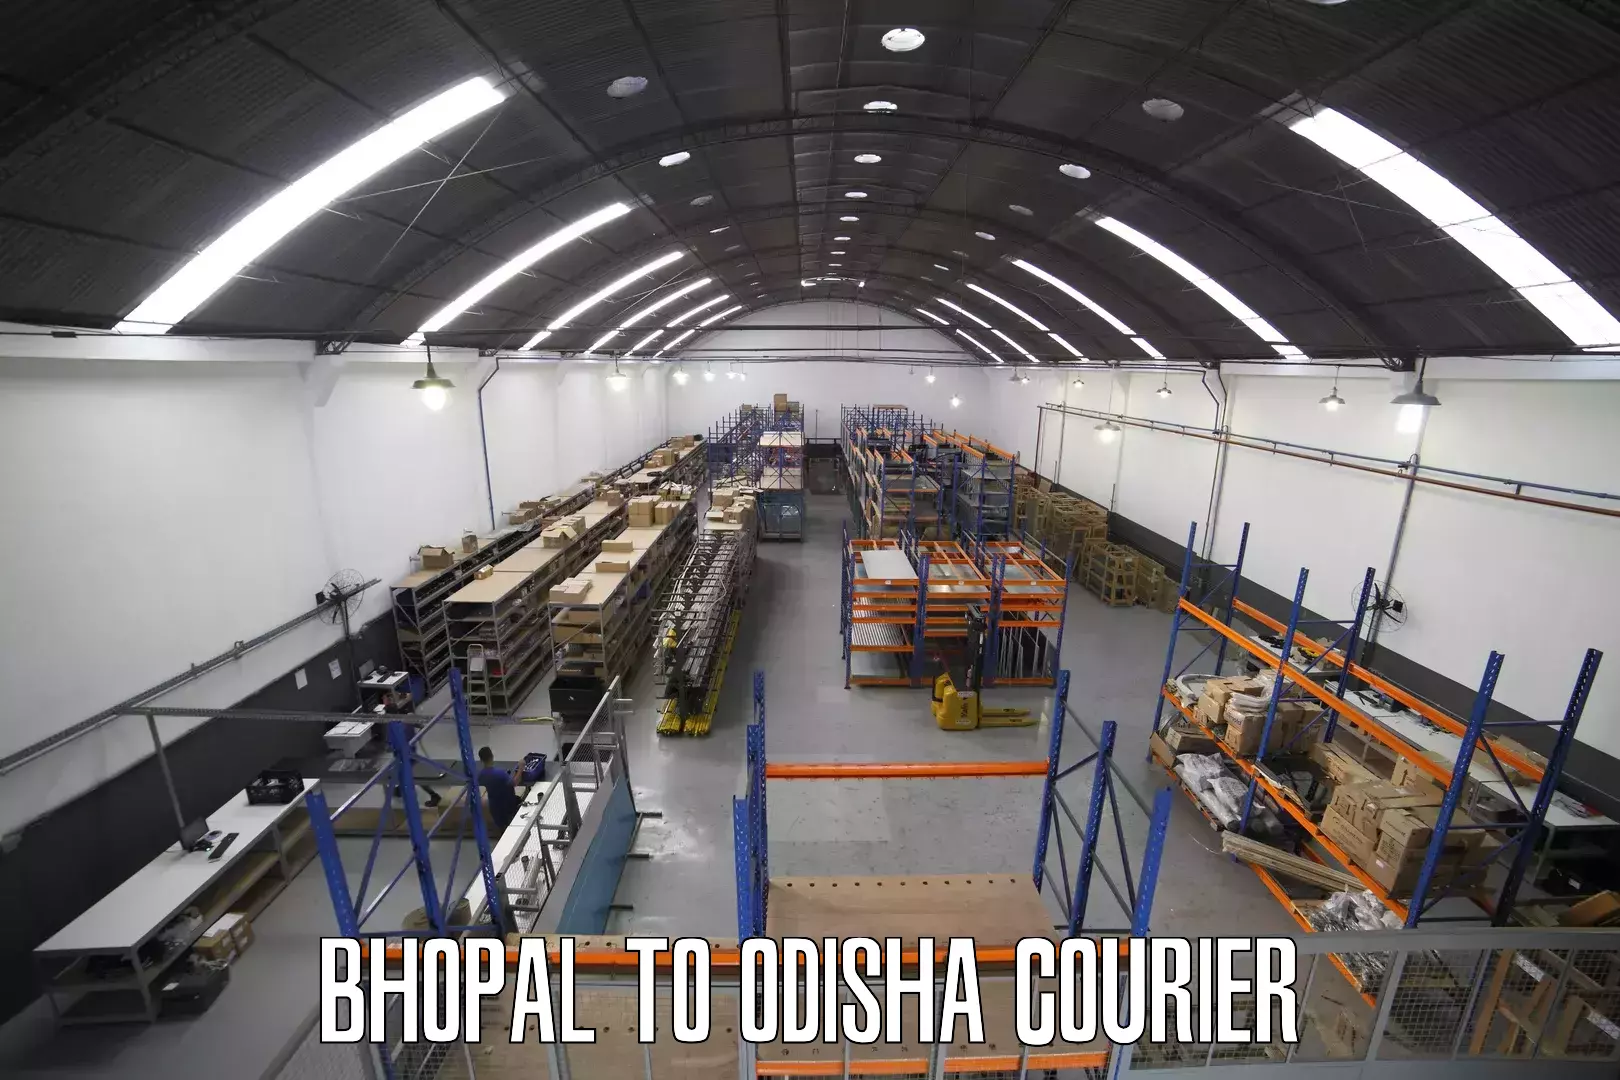 Customer-focused courier Bhopal to Talcher